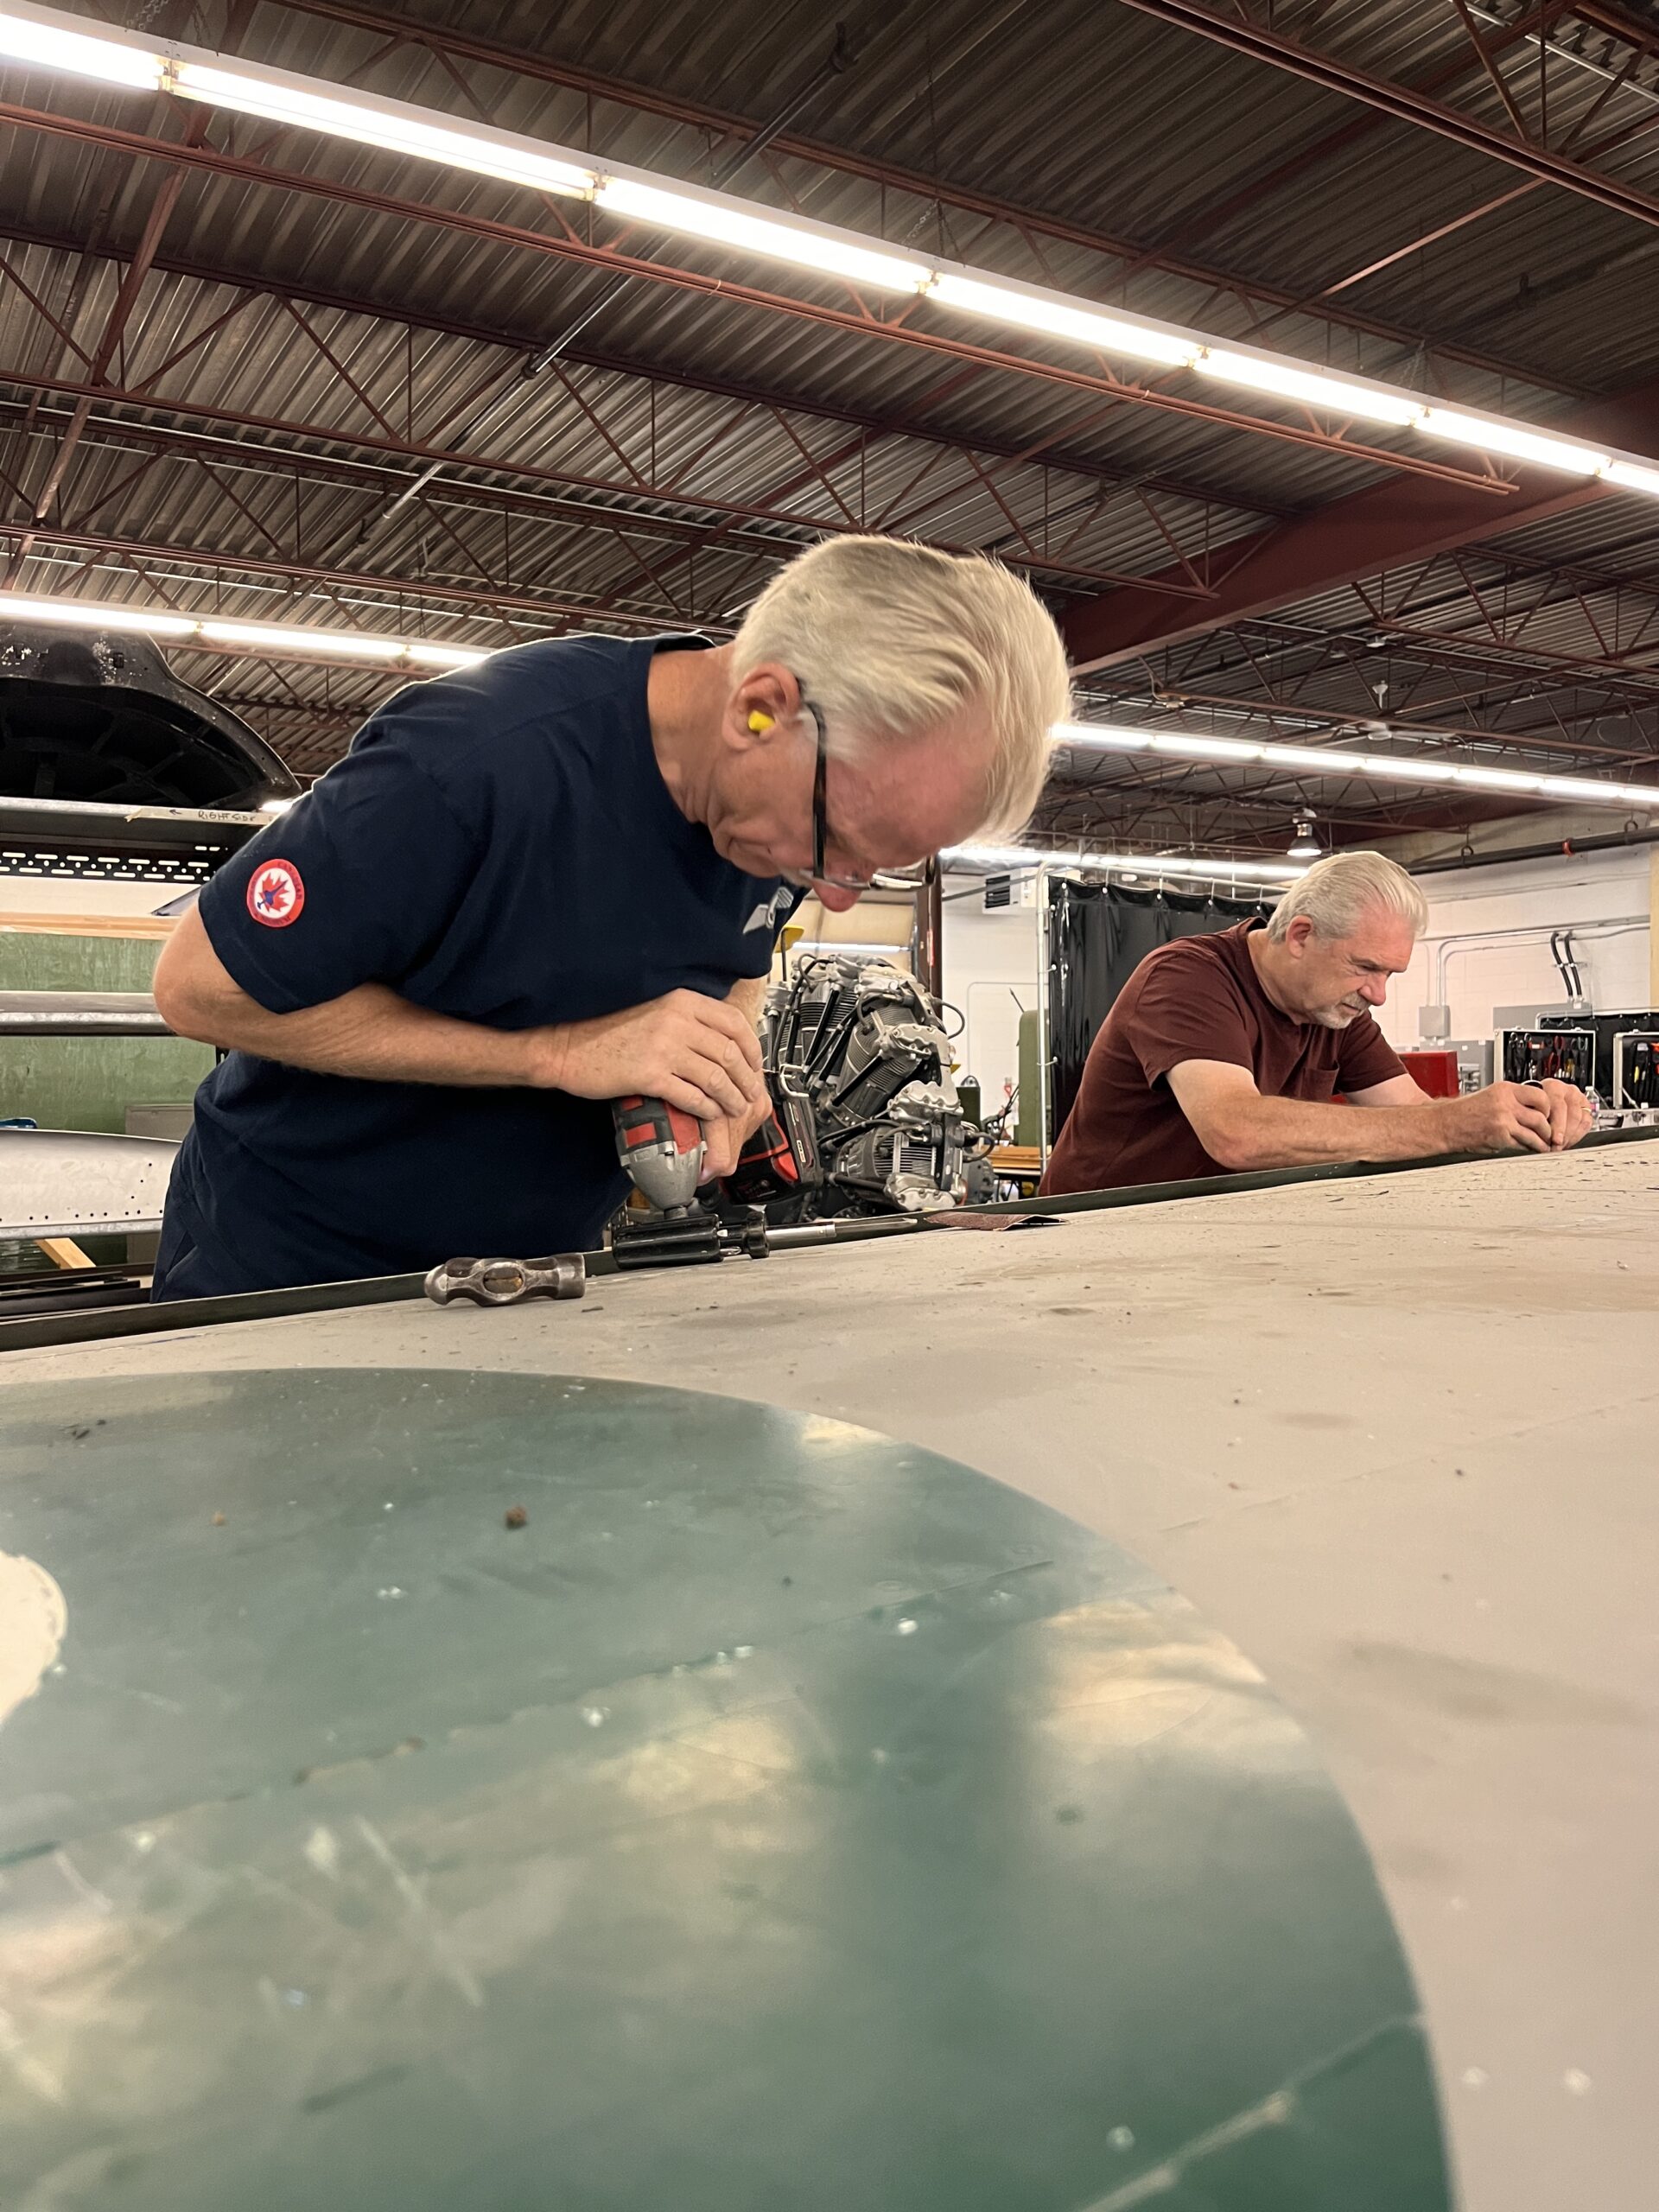 Two men use power tools to disassemble the wing of an aircraft.